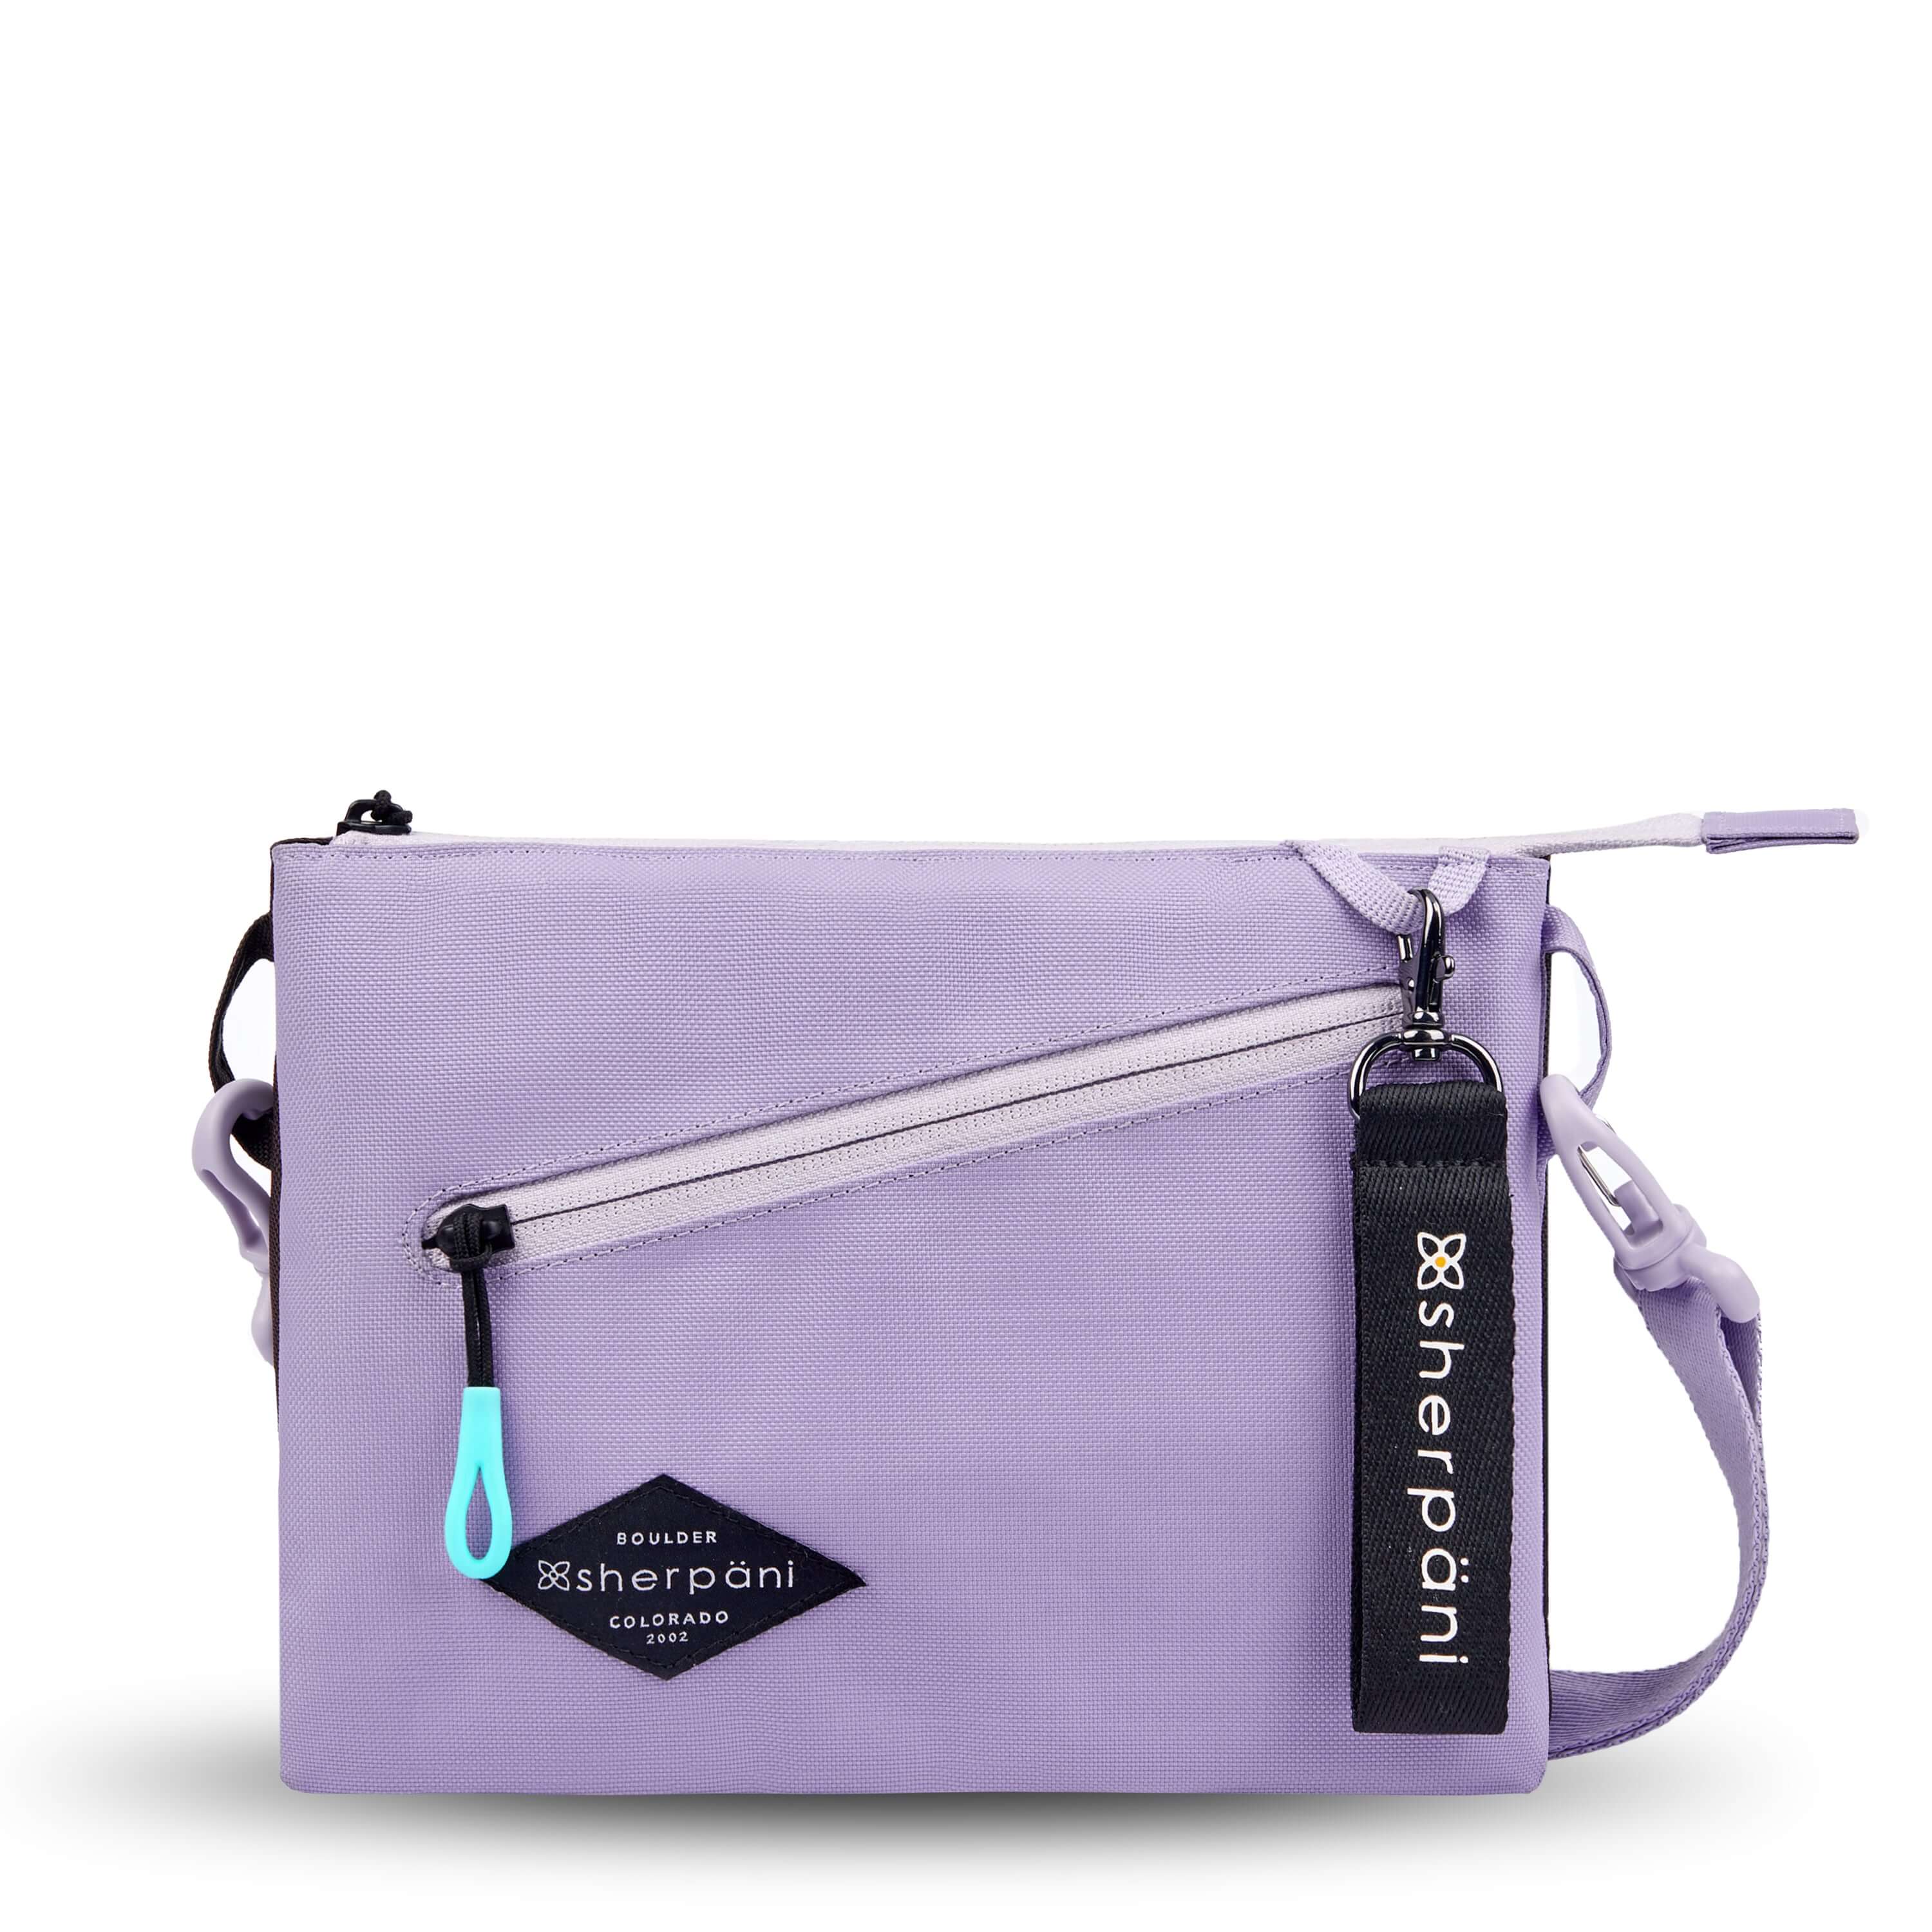 Flat front view of Sherpani crossbody, the Zoom in Lavender. The bag is two-toned; the front half is lavender and the back half is brown. There is an external zipper pocket on the front with an easy-pull zipper accented in aqua. The bag has an adjustable/detachable crossbody strap. There is a branded Sherpani keychain clipped to a fabric loop on the upper right corner. 